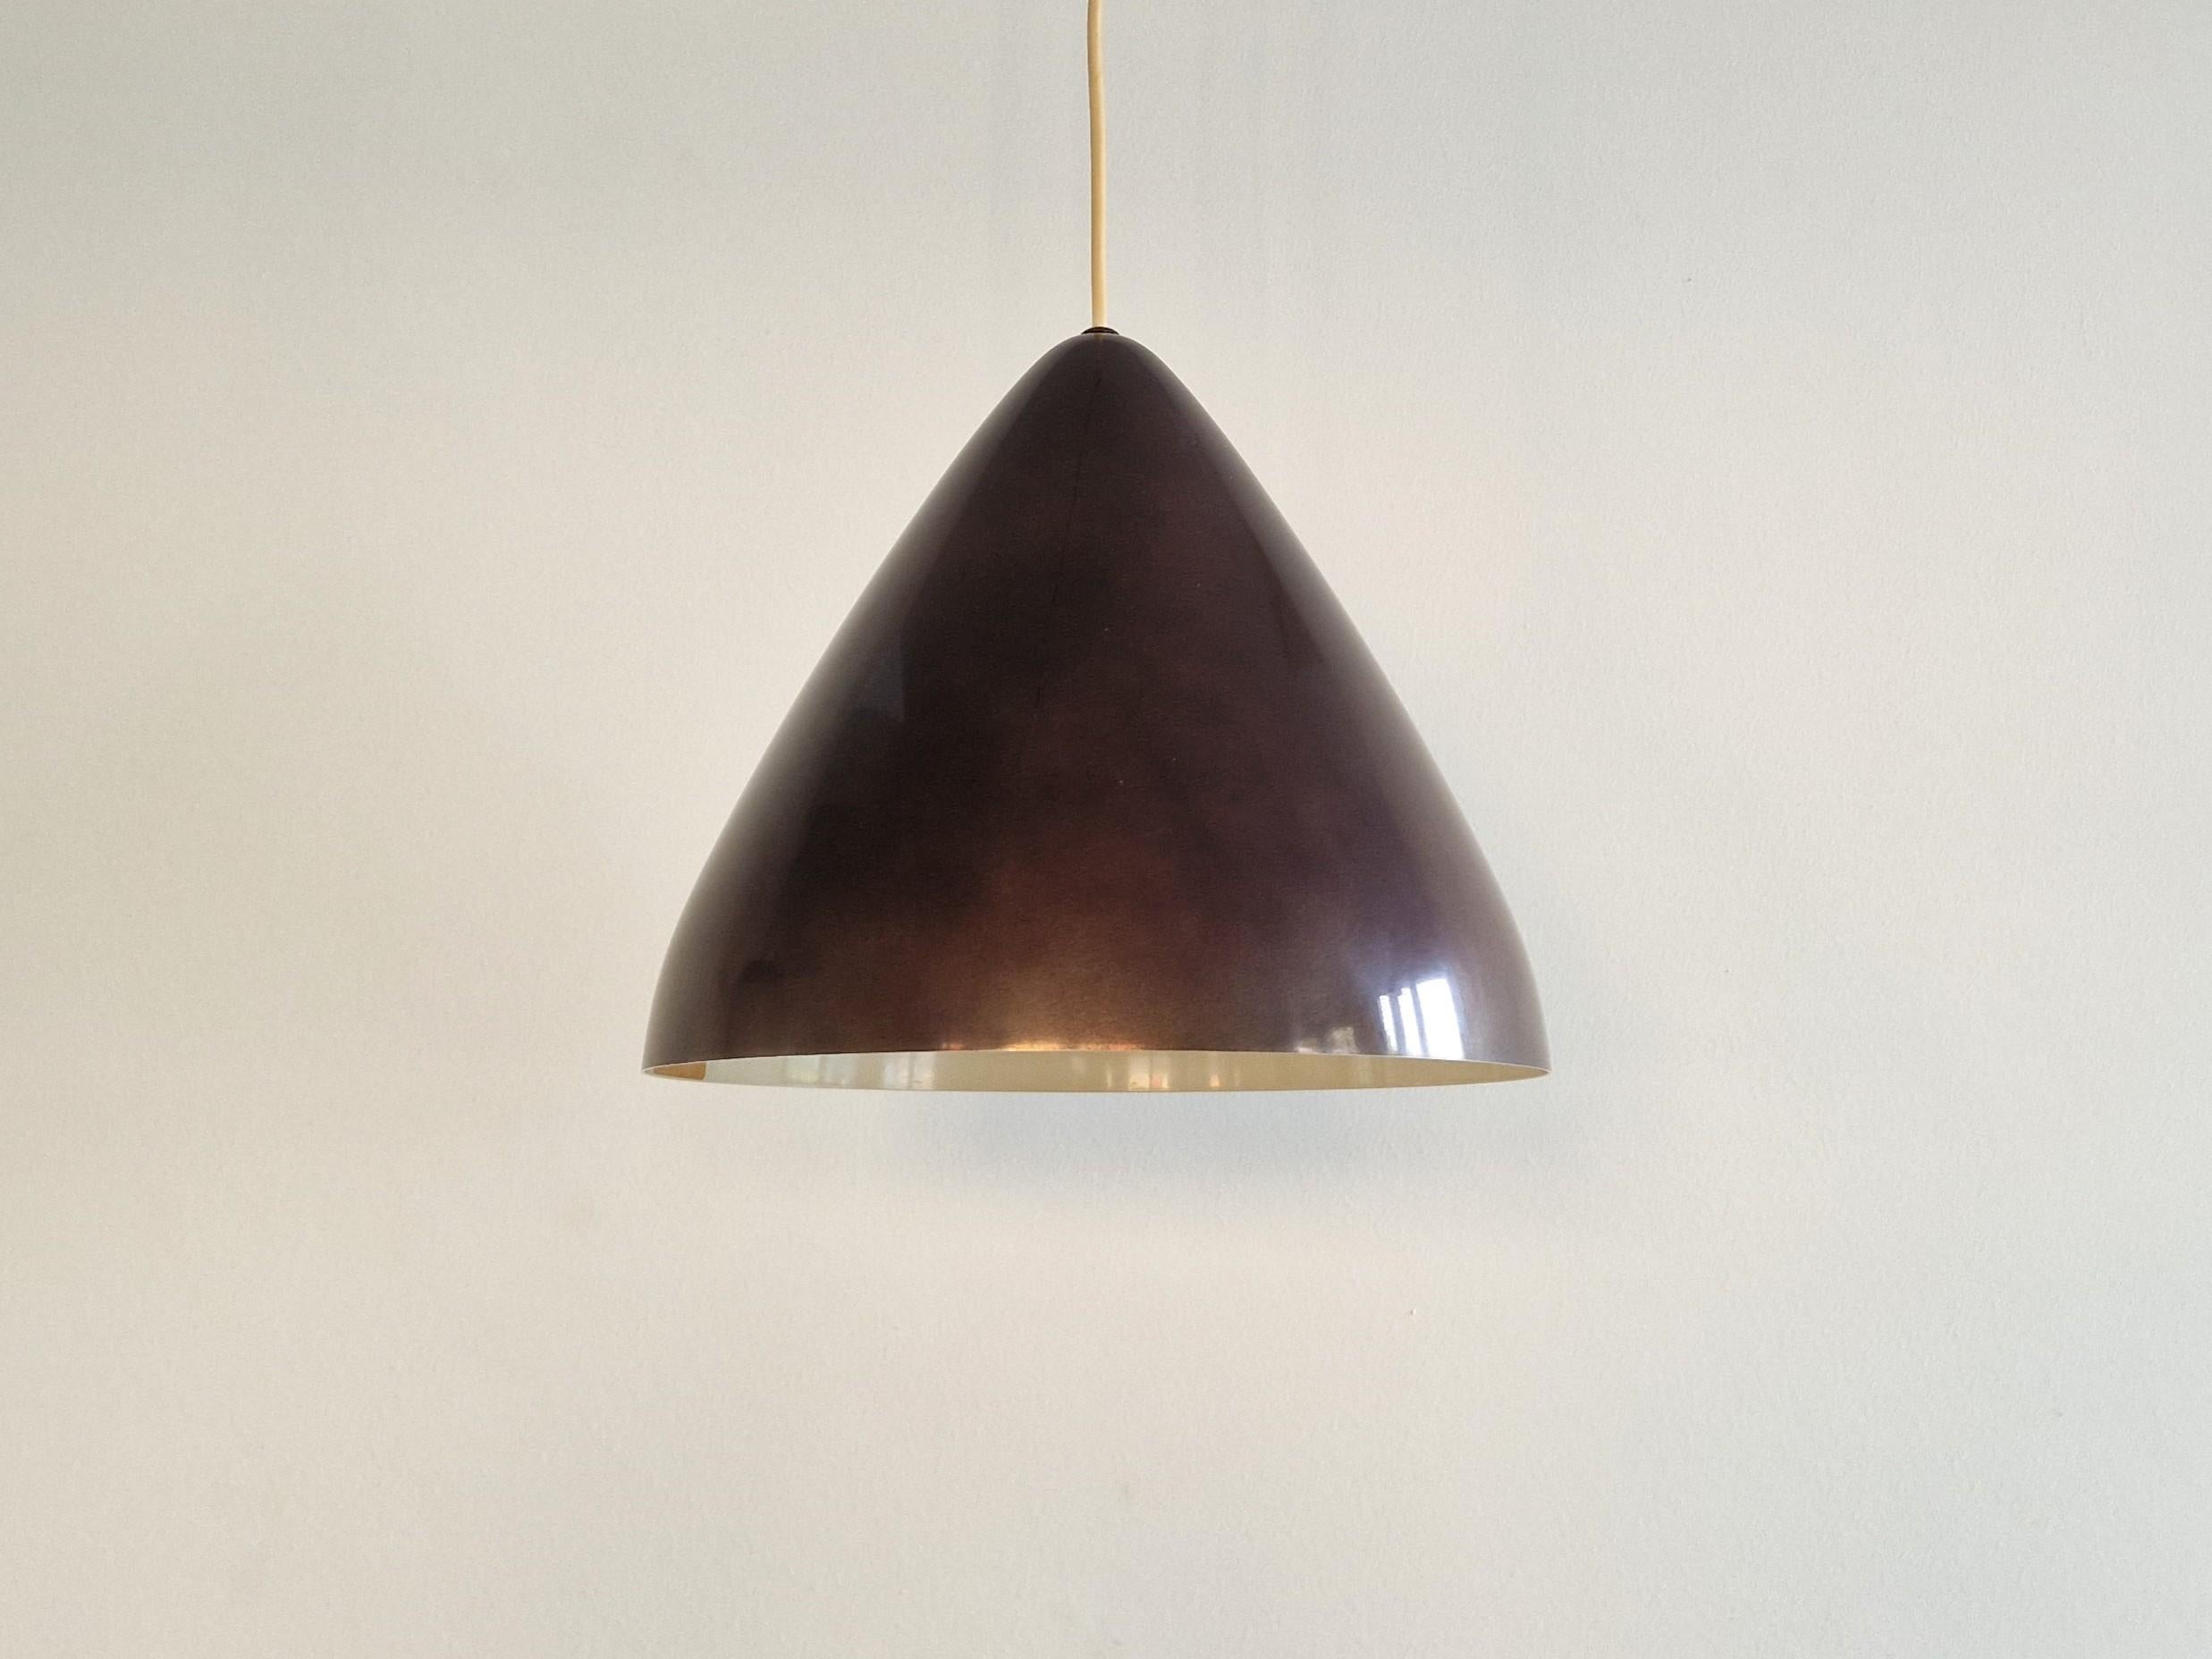 This iconic pendant light was designed by the Finnish designer Lisa Johansson-Pape for Orno. The lamp has a metalic dark wine red colored outside and a cream/off-white (due to age/use) inside. This lamp is labelled on the inside with the Orno label.